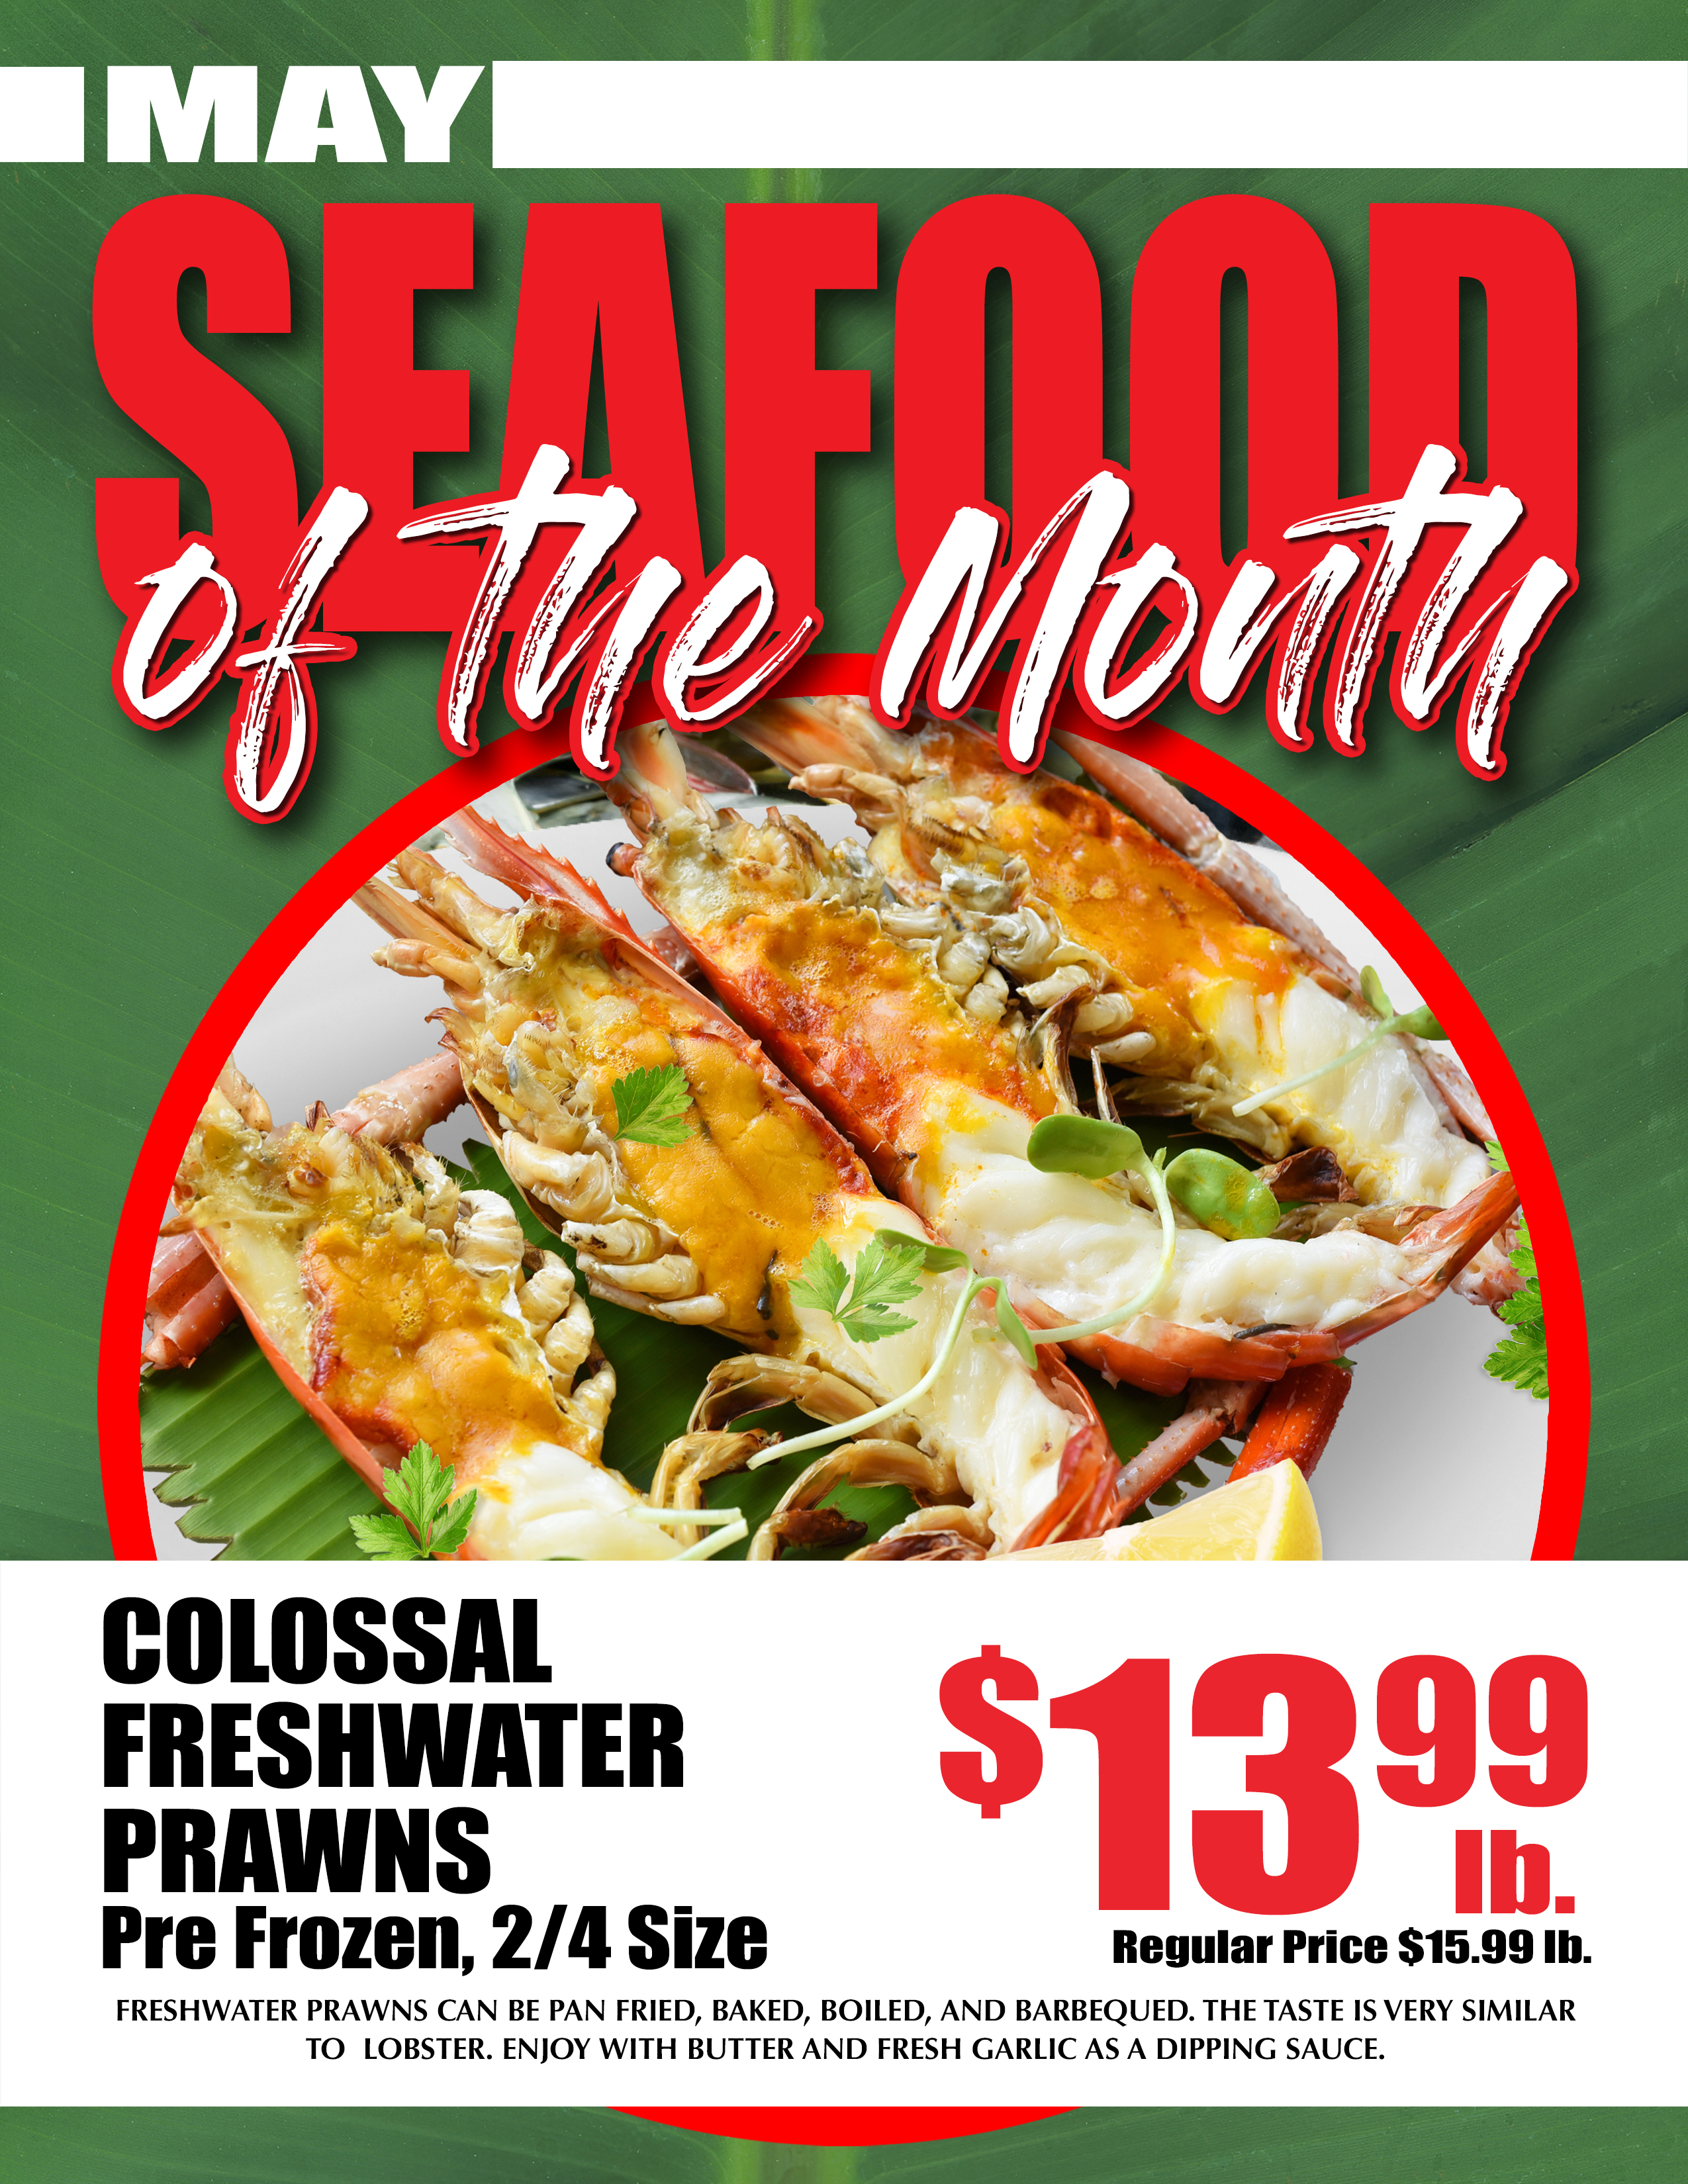 Seafood of the month